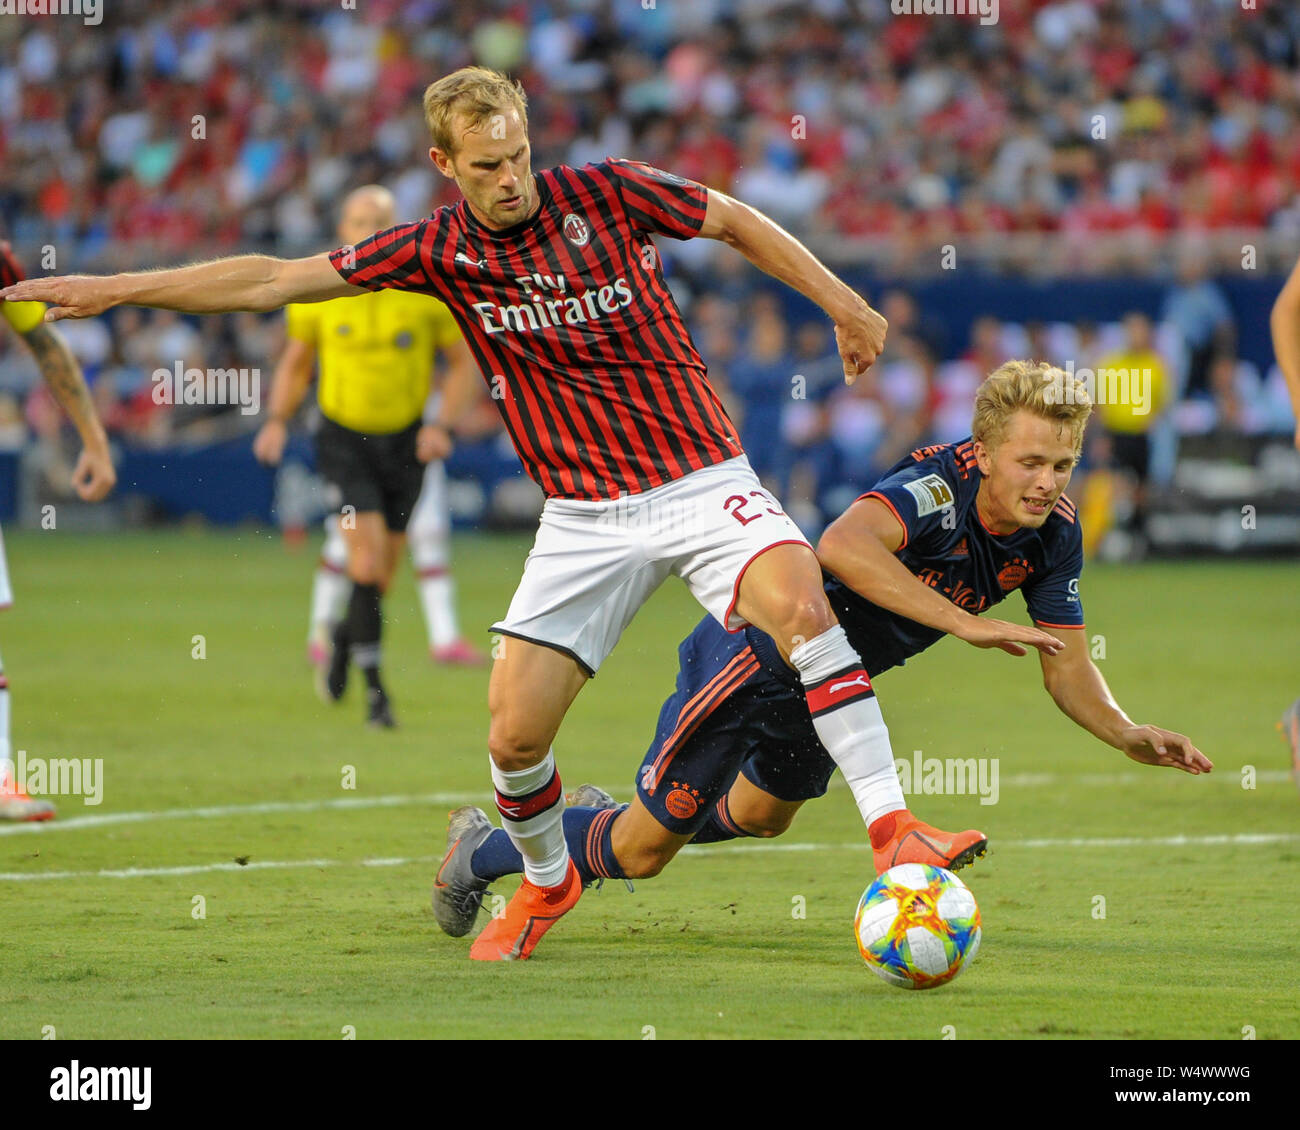 Kansas City, KS, USA. 23rd July, 2019. AC Milan defender, Ivan Strinic  (23), and Bayern forward, Fiete Arp (15), clash while working for ball  control during the 2019 International Champions Cup match